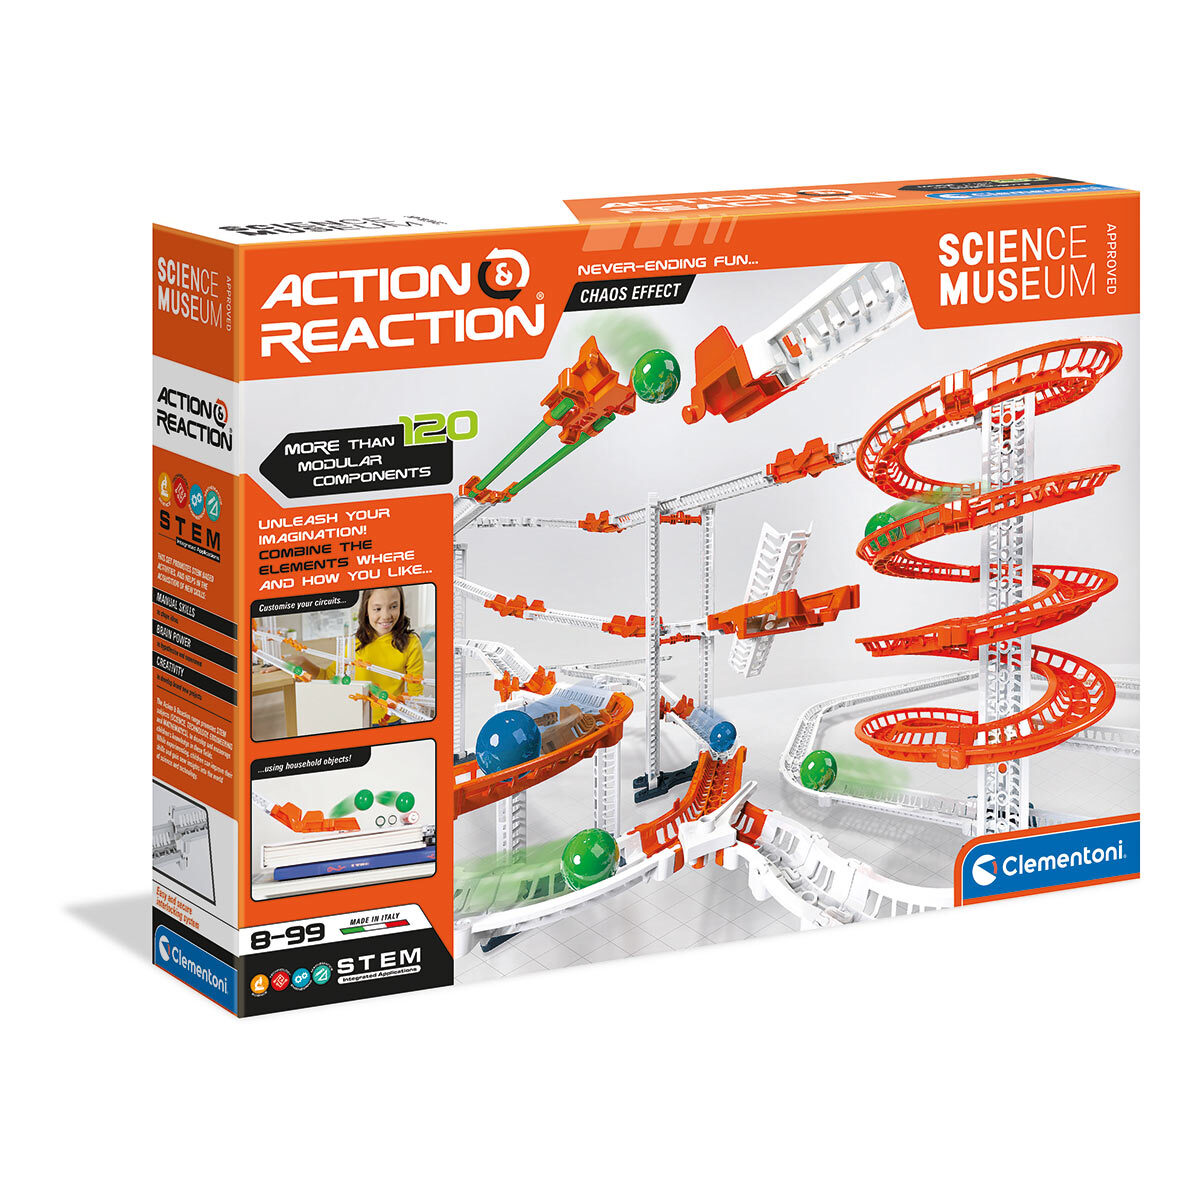 Buy Clementoni Action & Reaction Chaos Effect Marble Run Box Image at Costco.co.uk